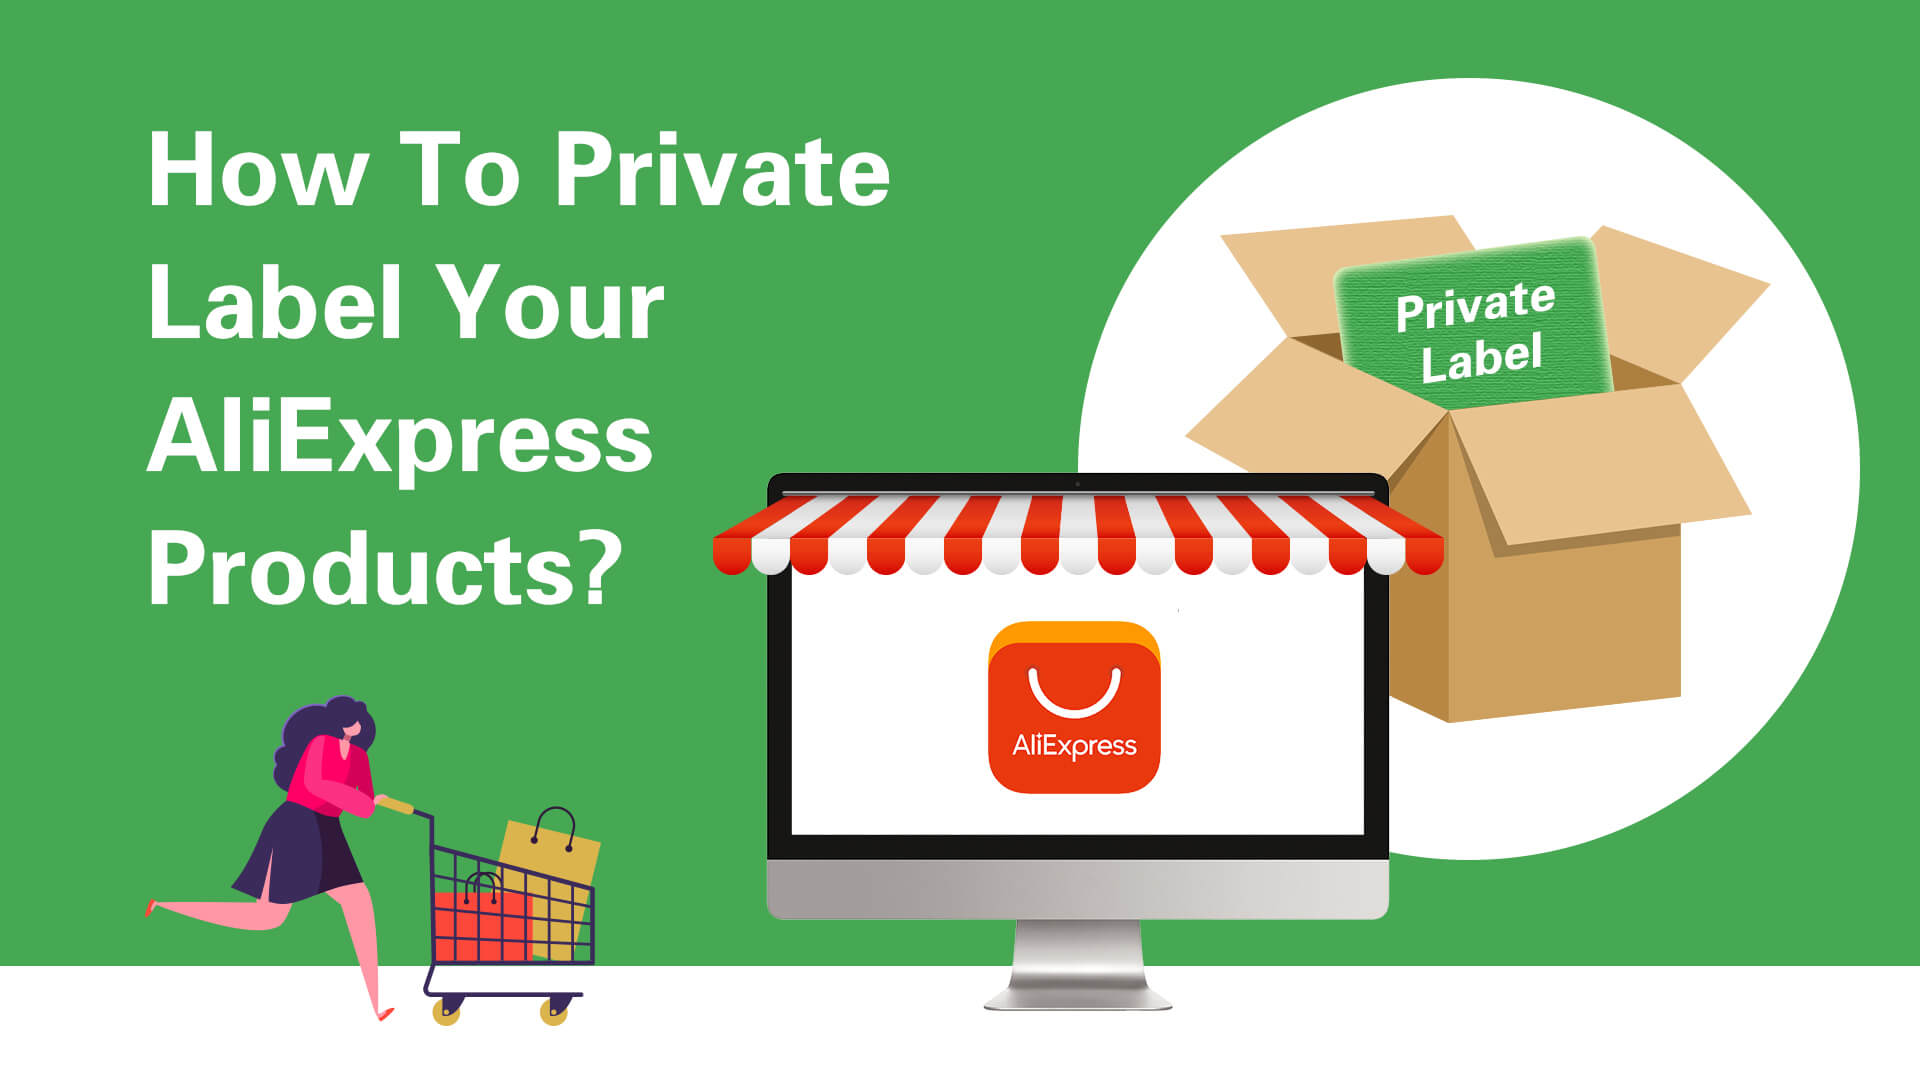 How to Private Label Your AliExpress Products